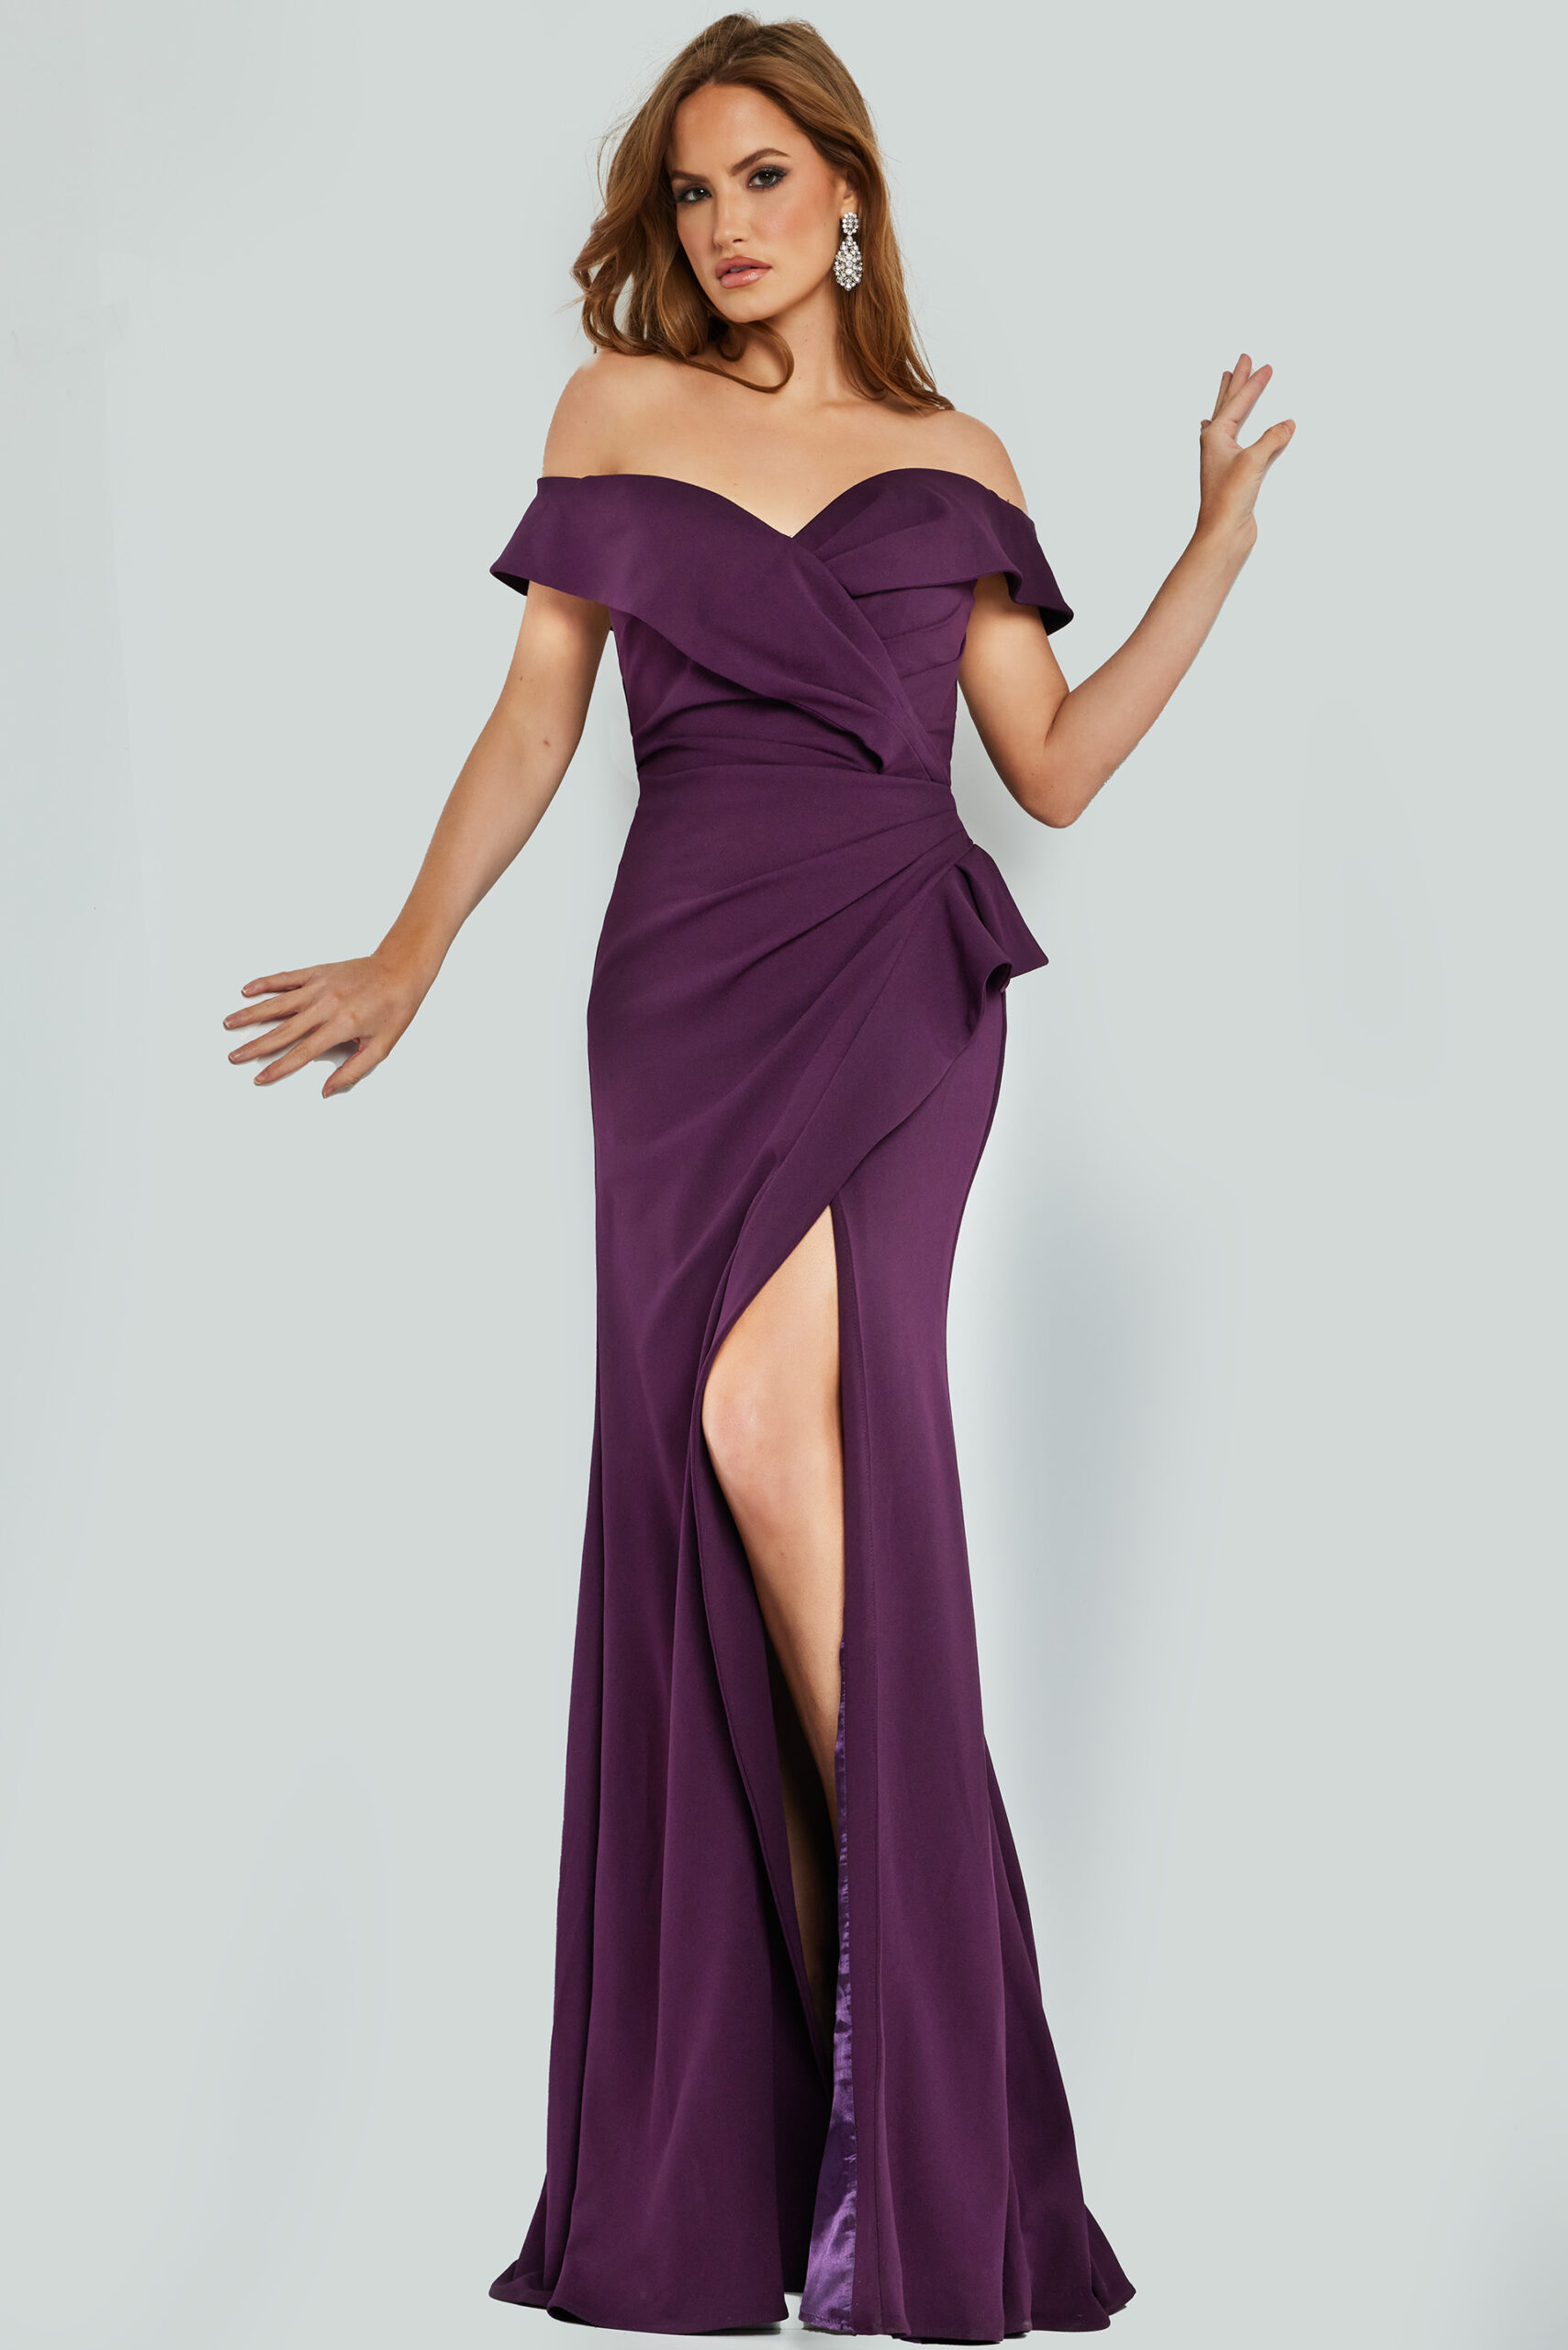 Plum Off the Shoulder Pleated Bodice Dress 06286